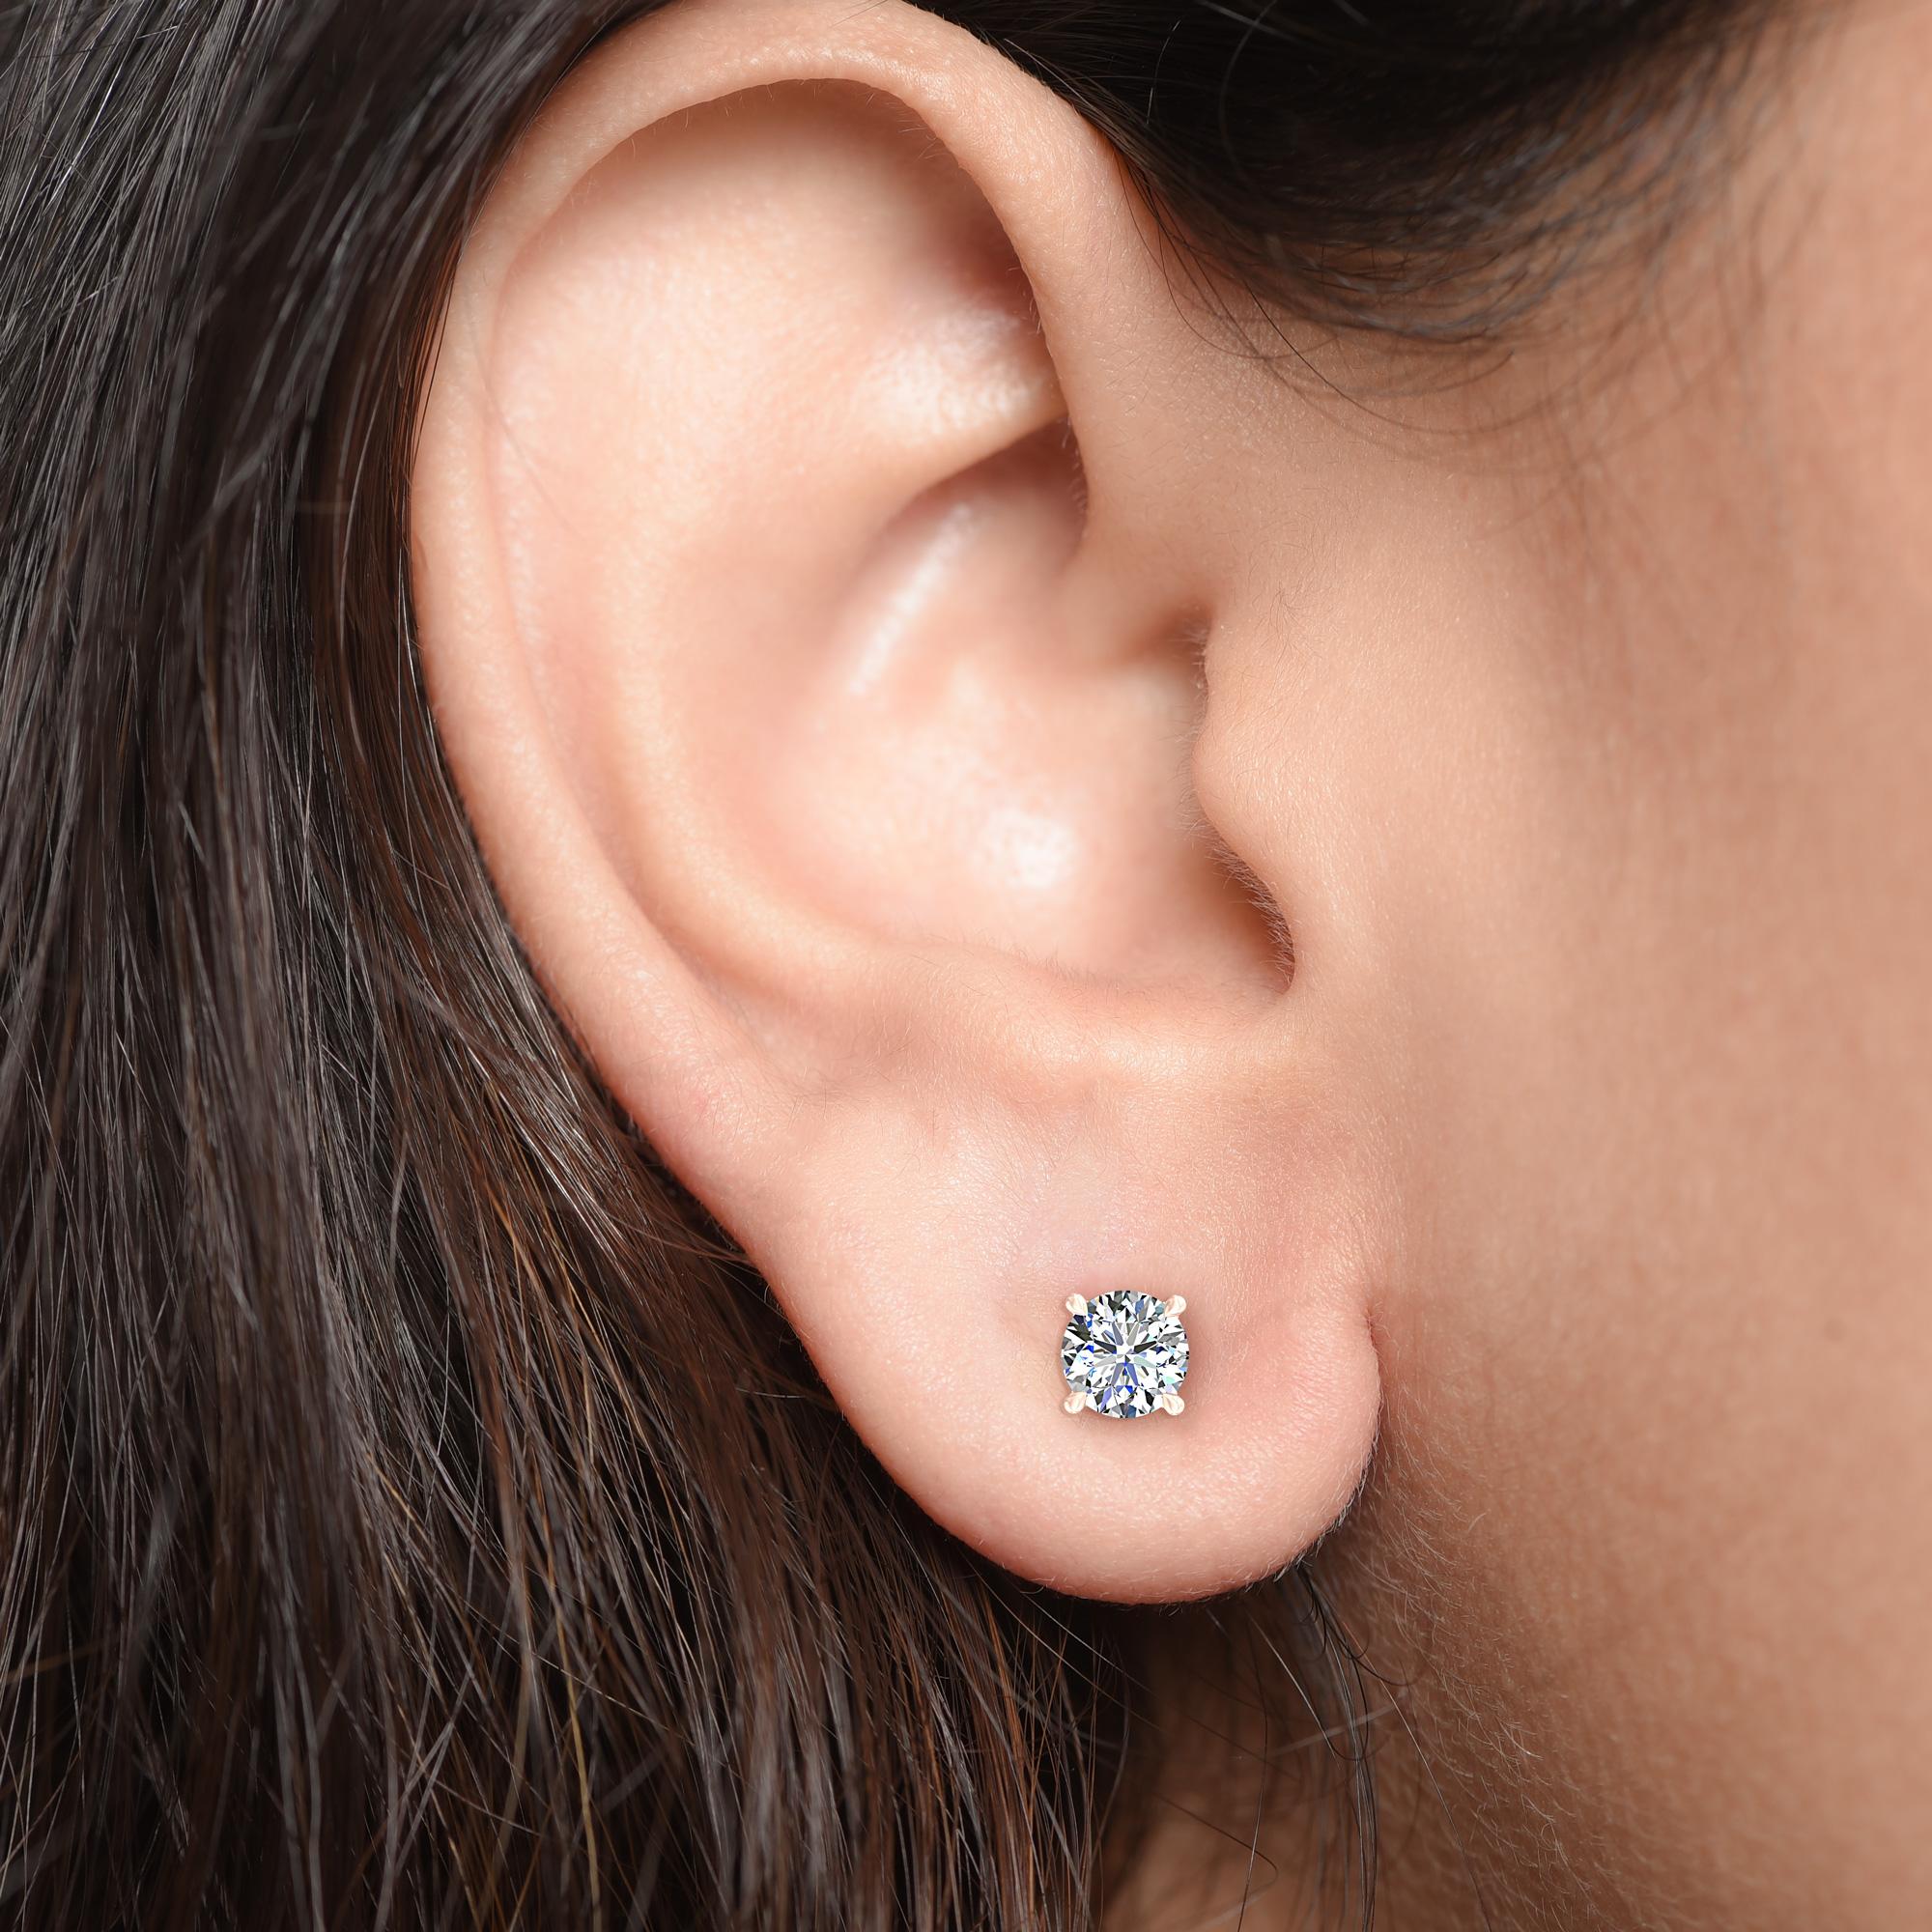 These classic GIA certified diamond studs showcase a pair of perfectly matched diamonds weighing total 0.75 carats. Crafted in 18-karat rose gold, these four prong earrings are available in yellow and white gold as well.

Perfect for gifting and for